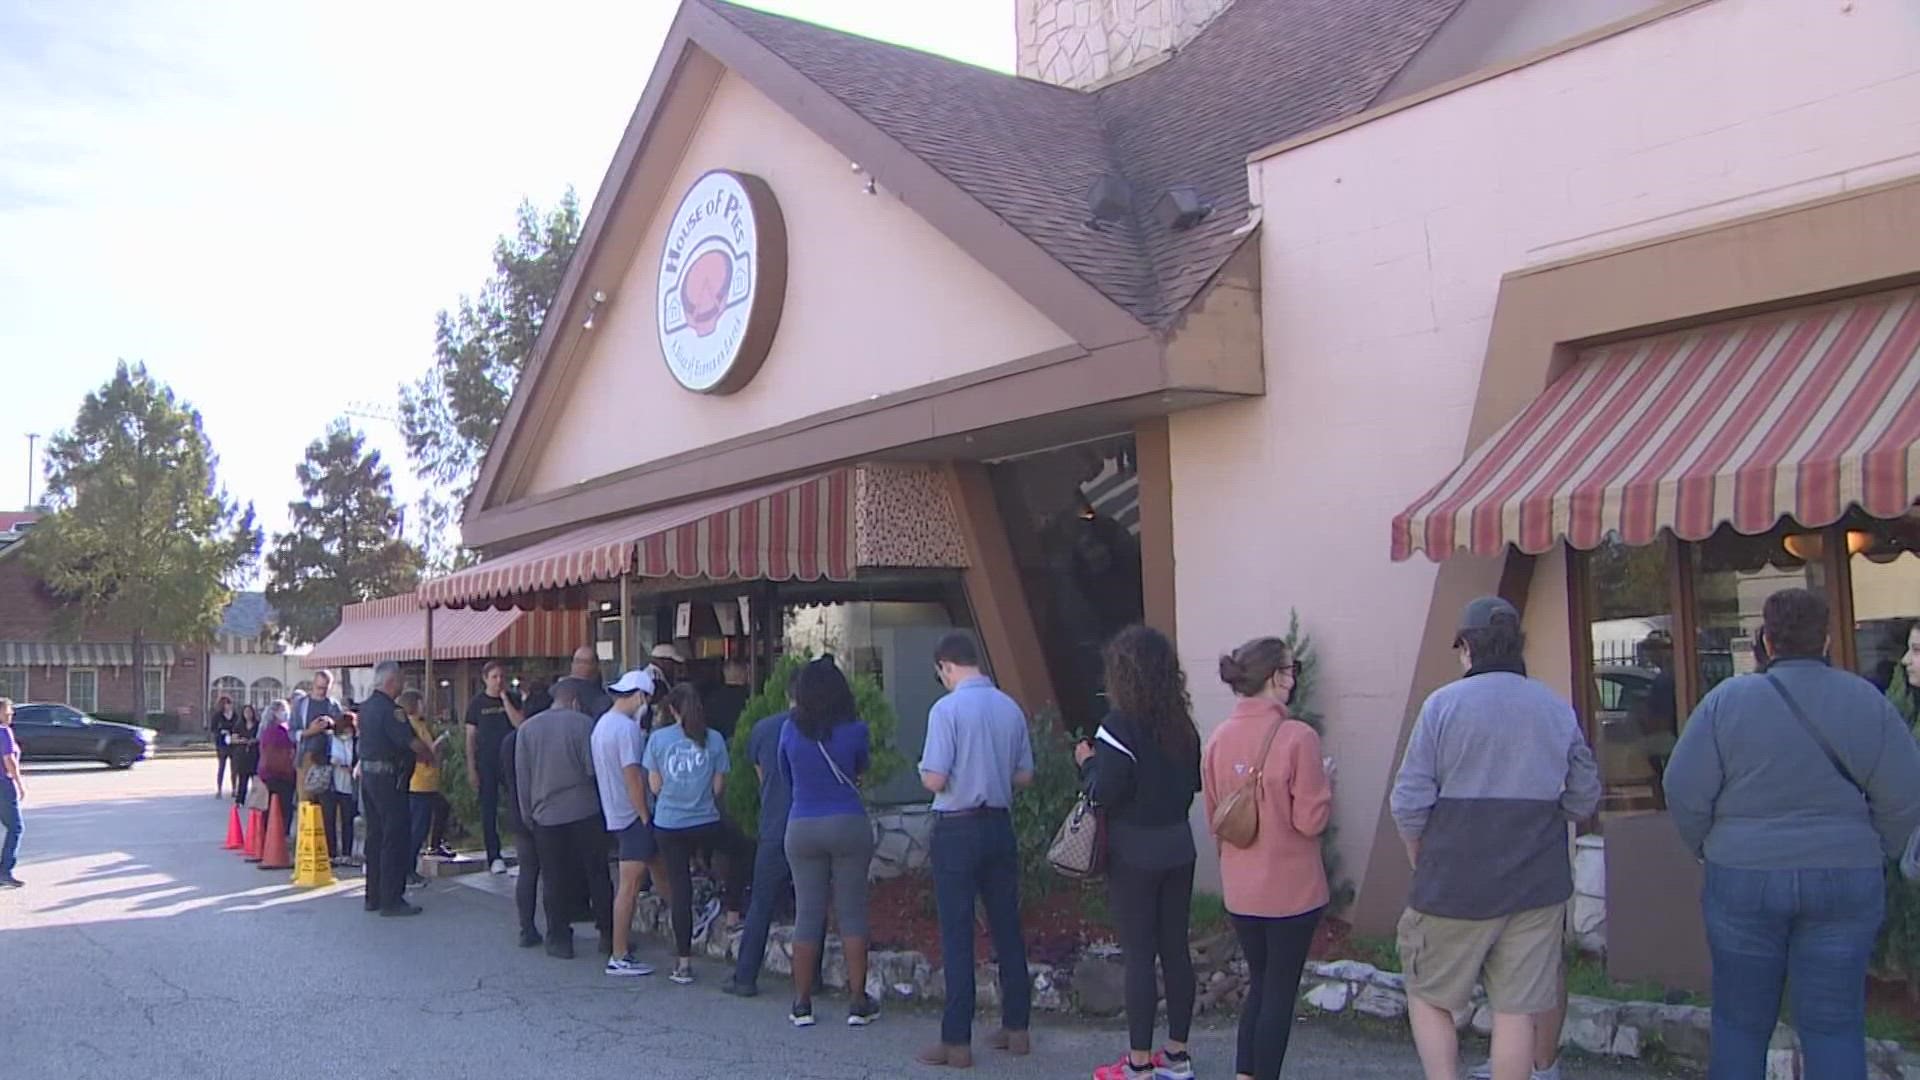 Houstonians have made a tradition out of waiting to buy pies from stores across the city.